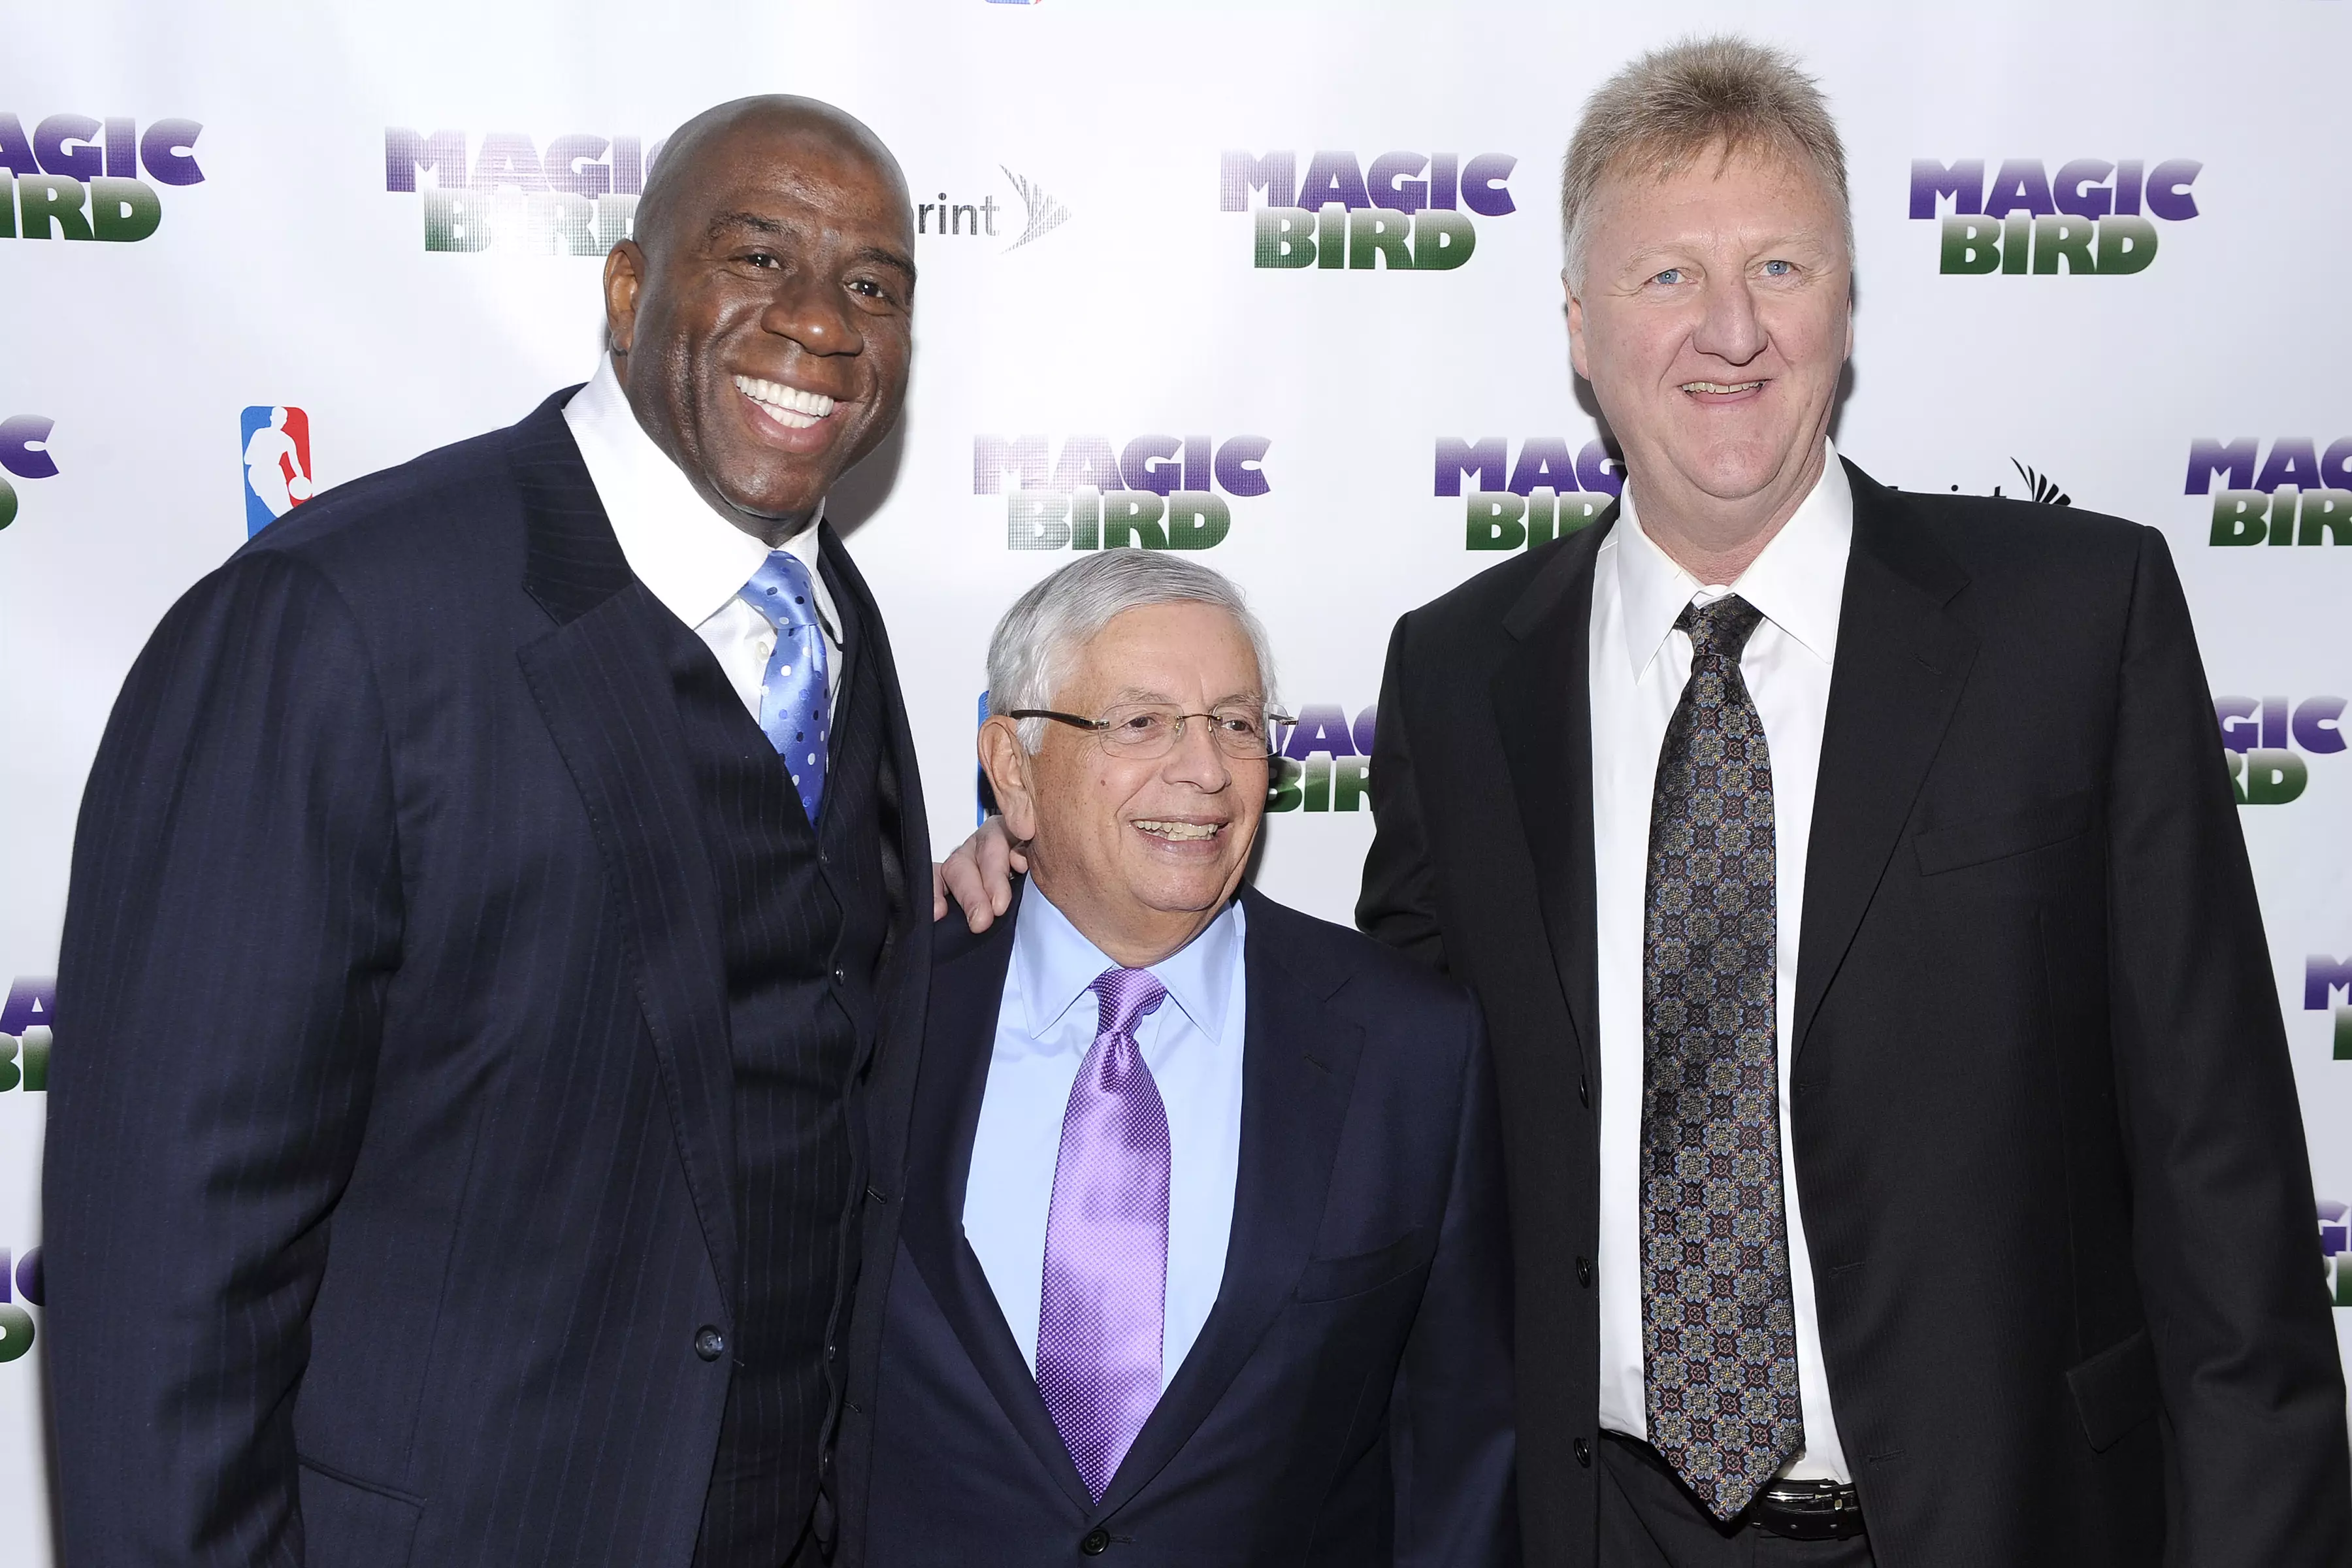 Larry Bird (right) has been stitched up massively.